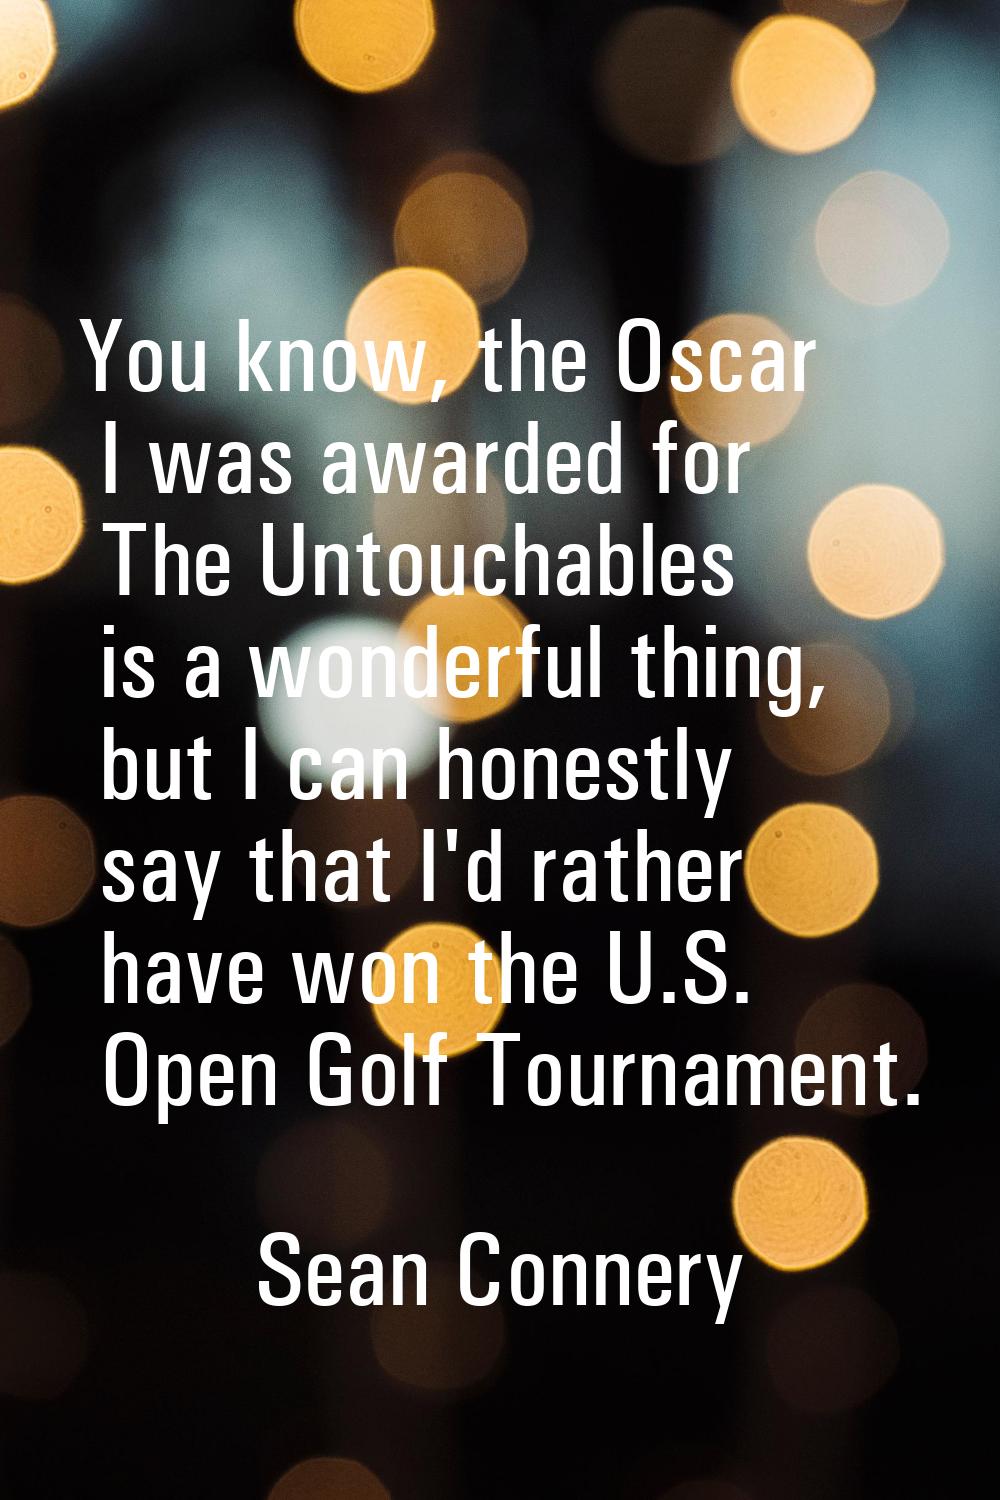 You know, the Oscar I was awarded for The Untouchables is a wonderful thing, but I can honestly say